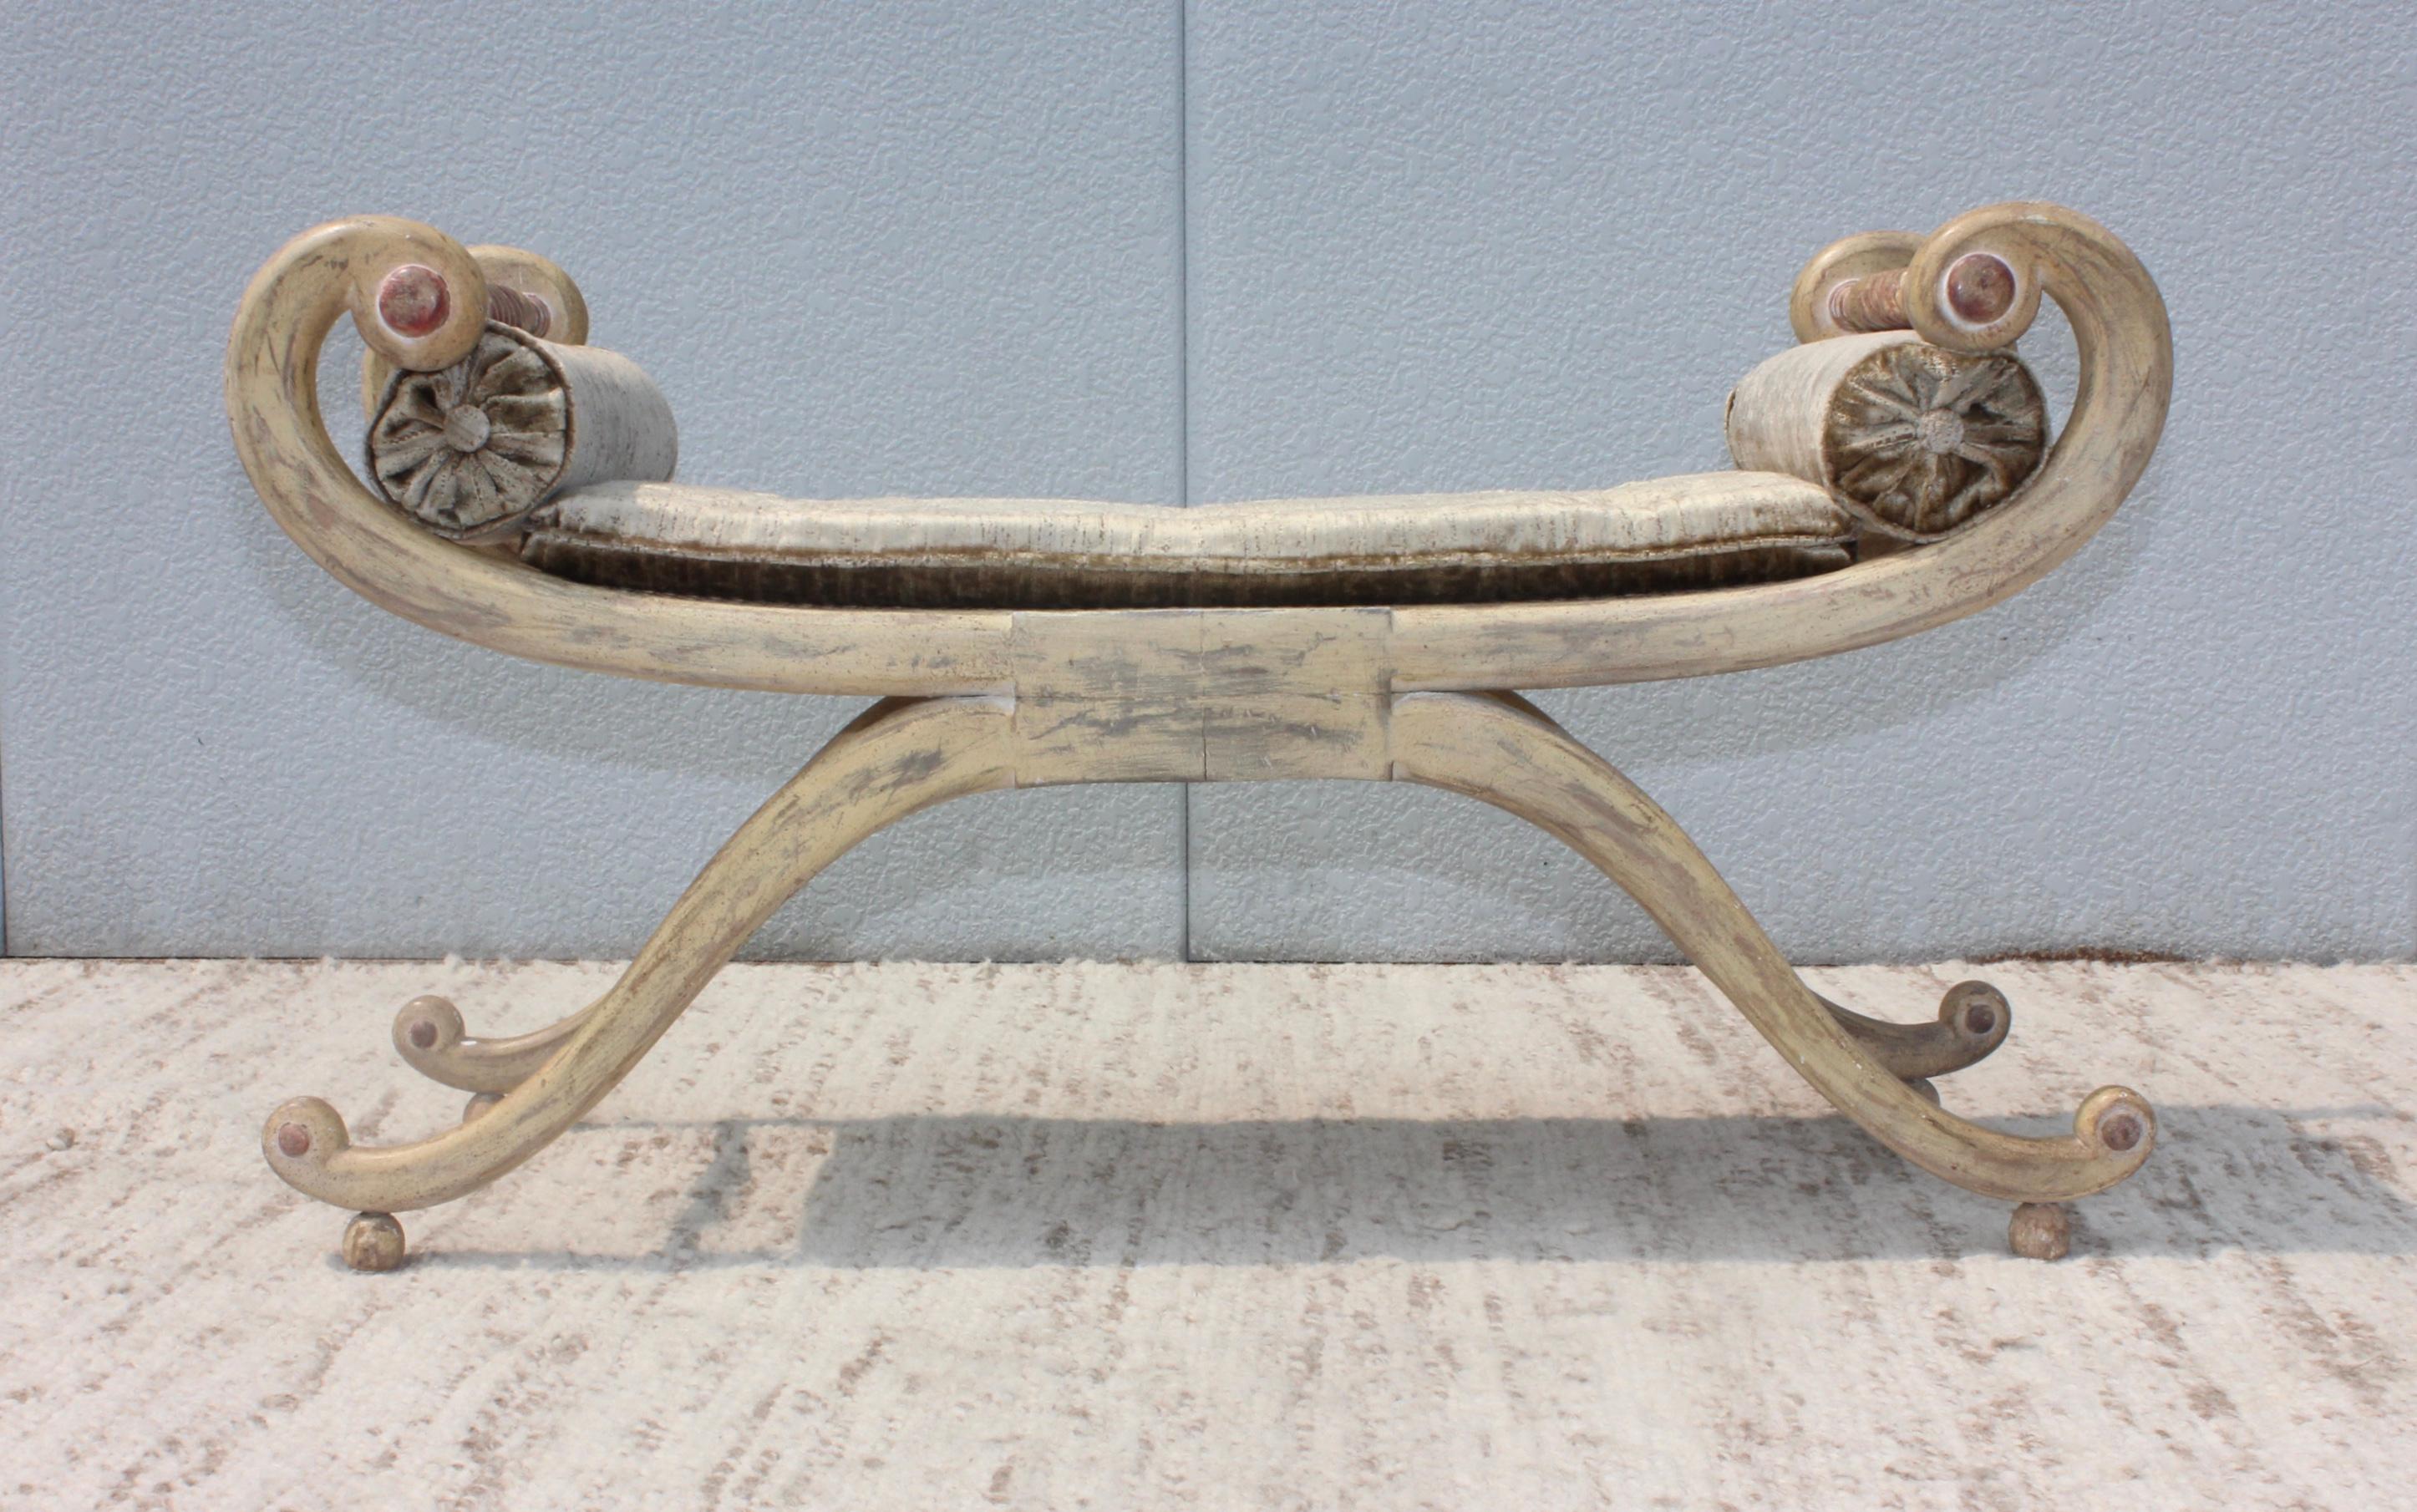 1940s French scroll arm bench in original distressed finish with velvet upholstery.